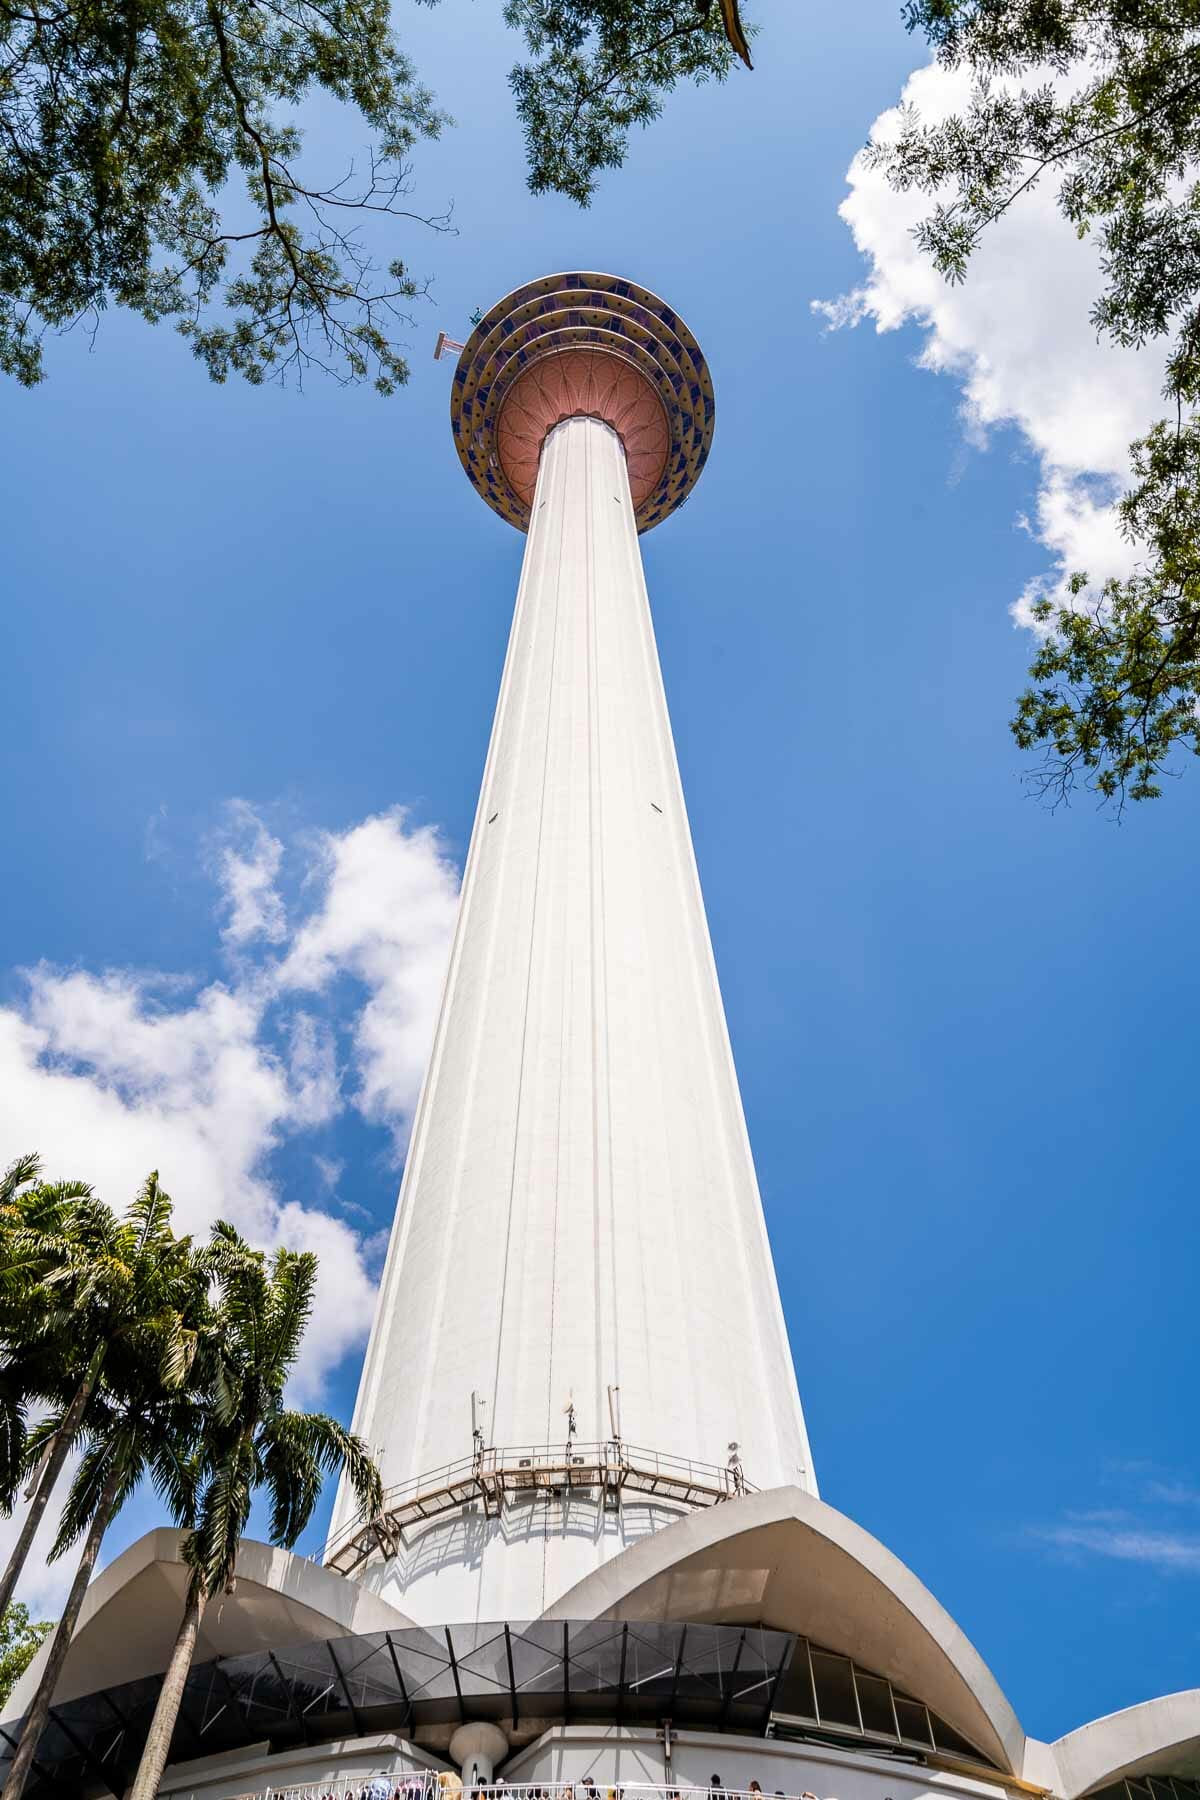 KL Tower from the ground in Kuala Lumpur